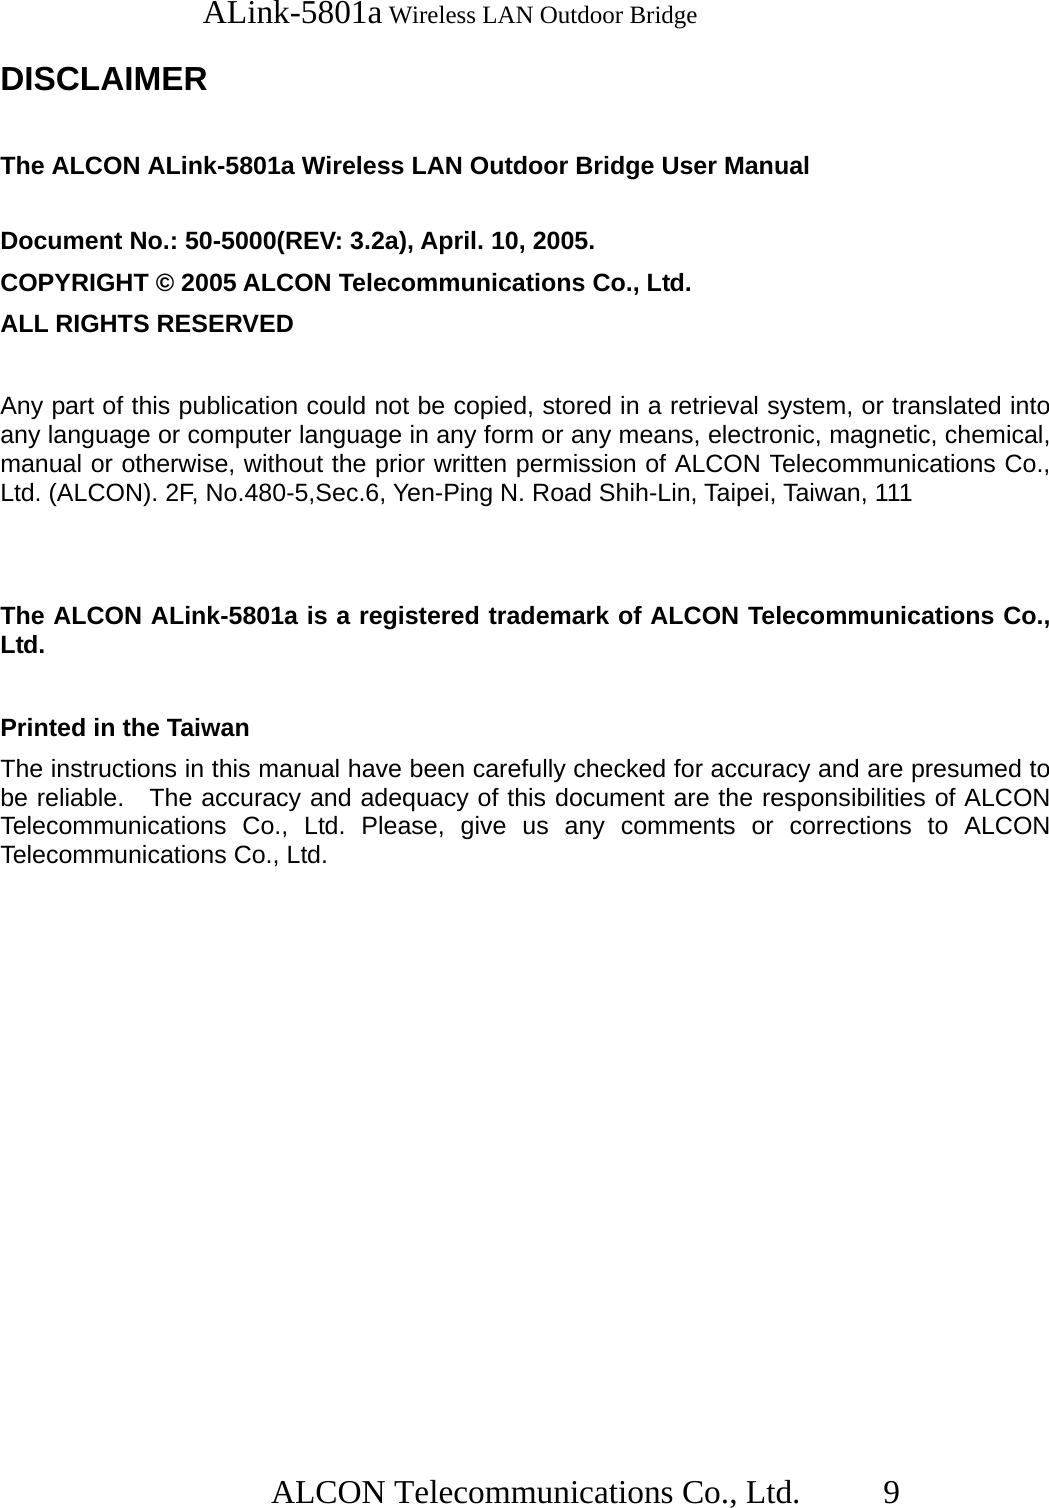   ALink-5801a Wireless LAN Outdoor Bridge                  ALCON Telecommunications Co., Ltd.   9  DISCLAIMER  The ALCON ALink-5801a Wireless LAN Outdoor Bridge User Manual  Document No.: 50-5000(REV: 3.2a), April. 10, 2005. COPYRIGHT © 2005 ALCON Telecommunications Co., Ltd. ALL RIGHTS RESERVED  Any part of this publication could not be copied, stored in a retrieval system, or translated into any language or computer language in any form or any means, electronic, magnetic, chemical, manual or otherwise, without the prior written permission of ALCON Telecommunications Co., Ltd. (ALCON). 2F, No.480-5,Sec.6, Yen-Ping N. Road Shih-Lin, Taipei, Taiwan, 111   The ALCON ALink-5801a is a registered trademark of ALCON Telecommunications Co., Ltd.  Printed in the Taiwan The instructions in this manual have been carefully checked for accuracy and are presumed to be reliable.   The accuracy and adequacy of this document are the responsibilities of ALCON Telecommunications Co., Ltd. Please, give us any comments or corrections to ALCON Telecommunications Co., Ltd. 